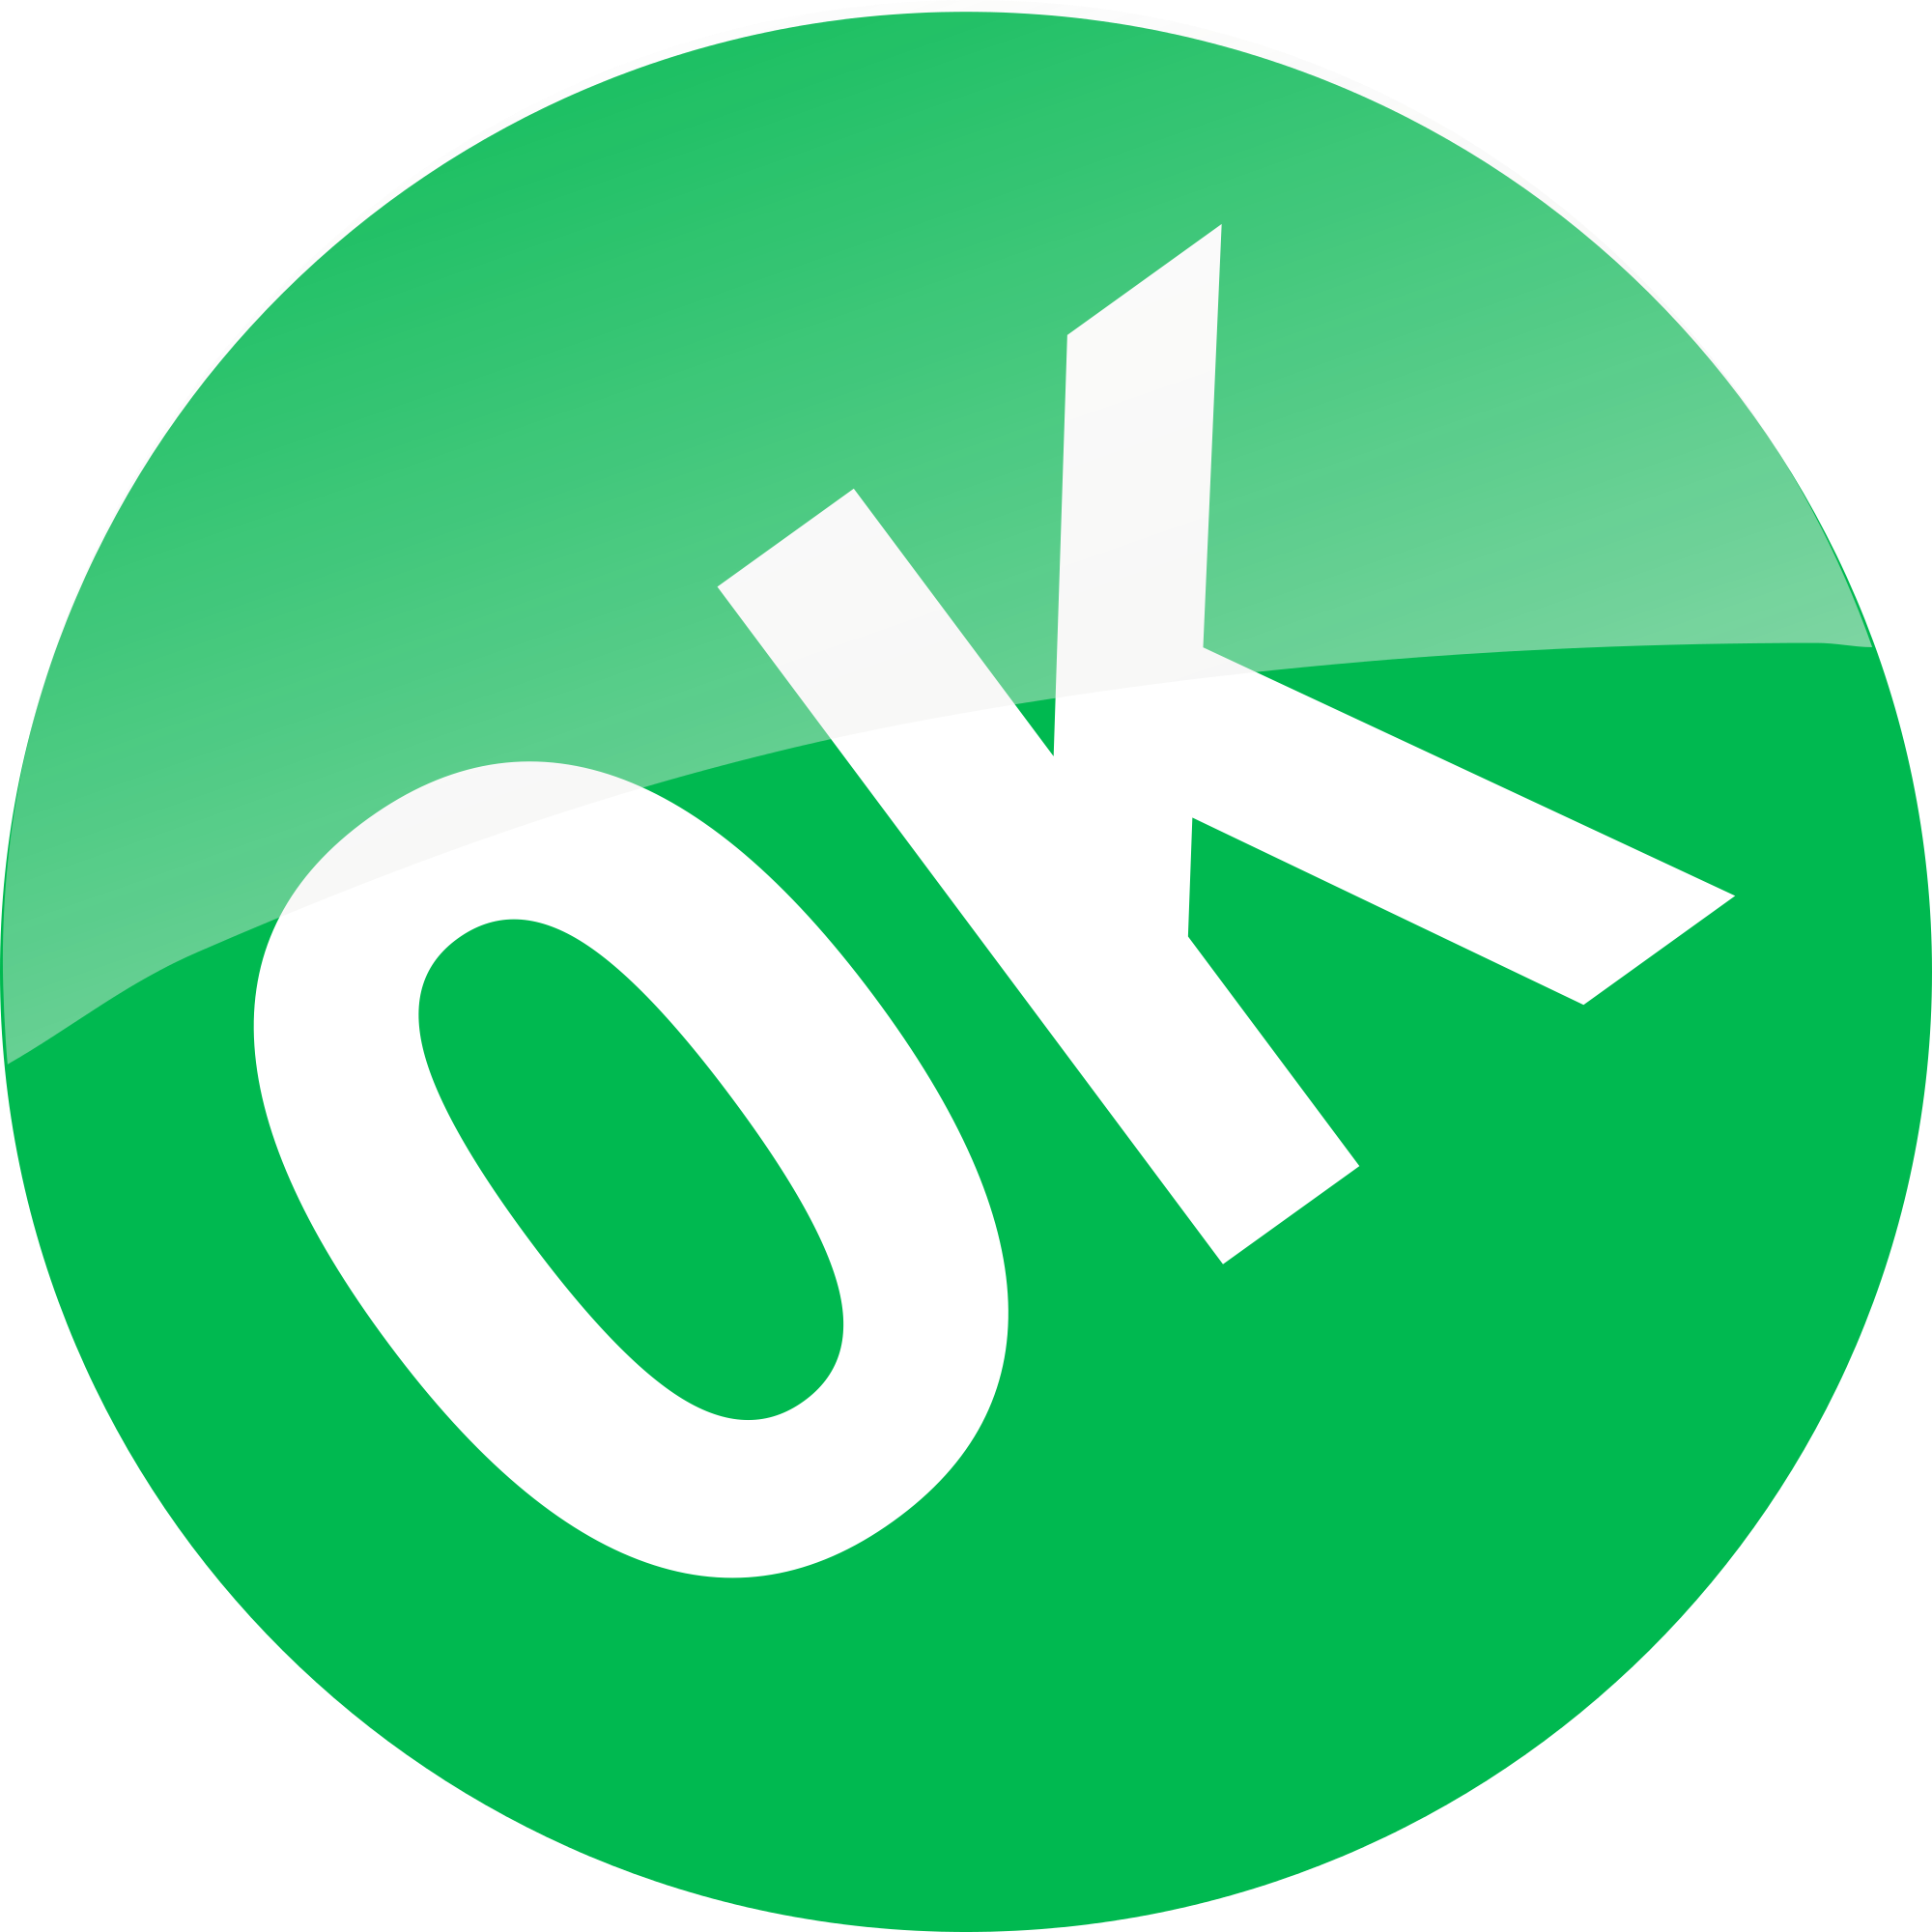 OK | Myanmar Defintition of OK at Shwebook Dictionary Pro